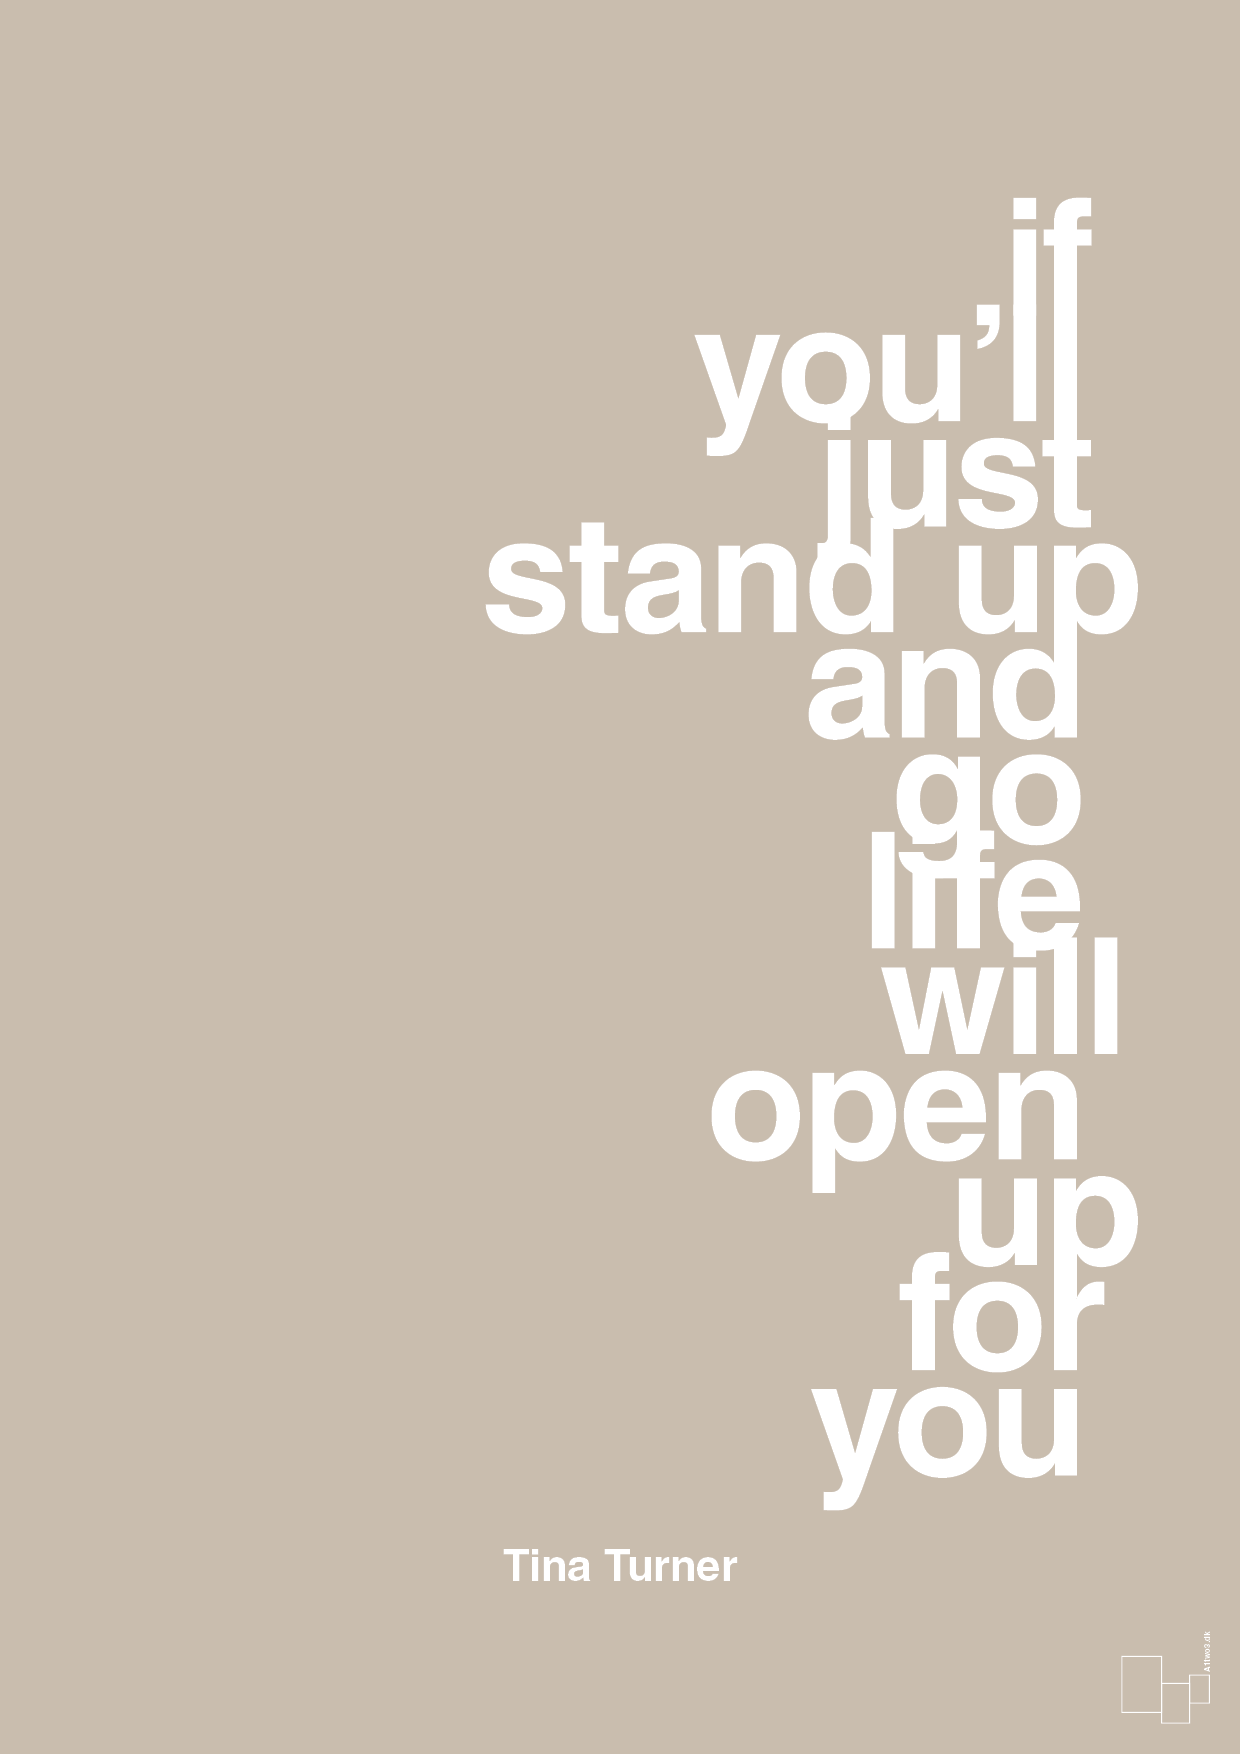 if you’ll just stand up and go life will open up for you - Plakat med Citater i Creamy Mushroom